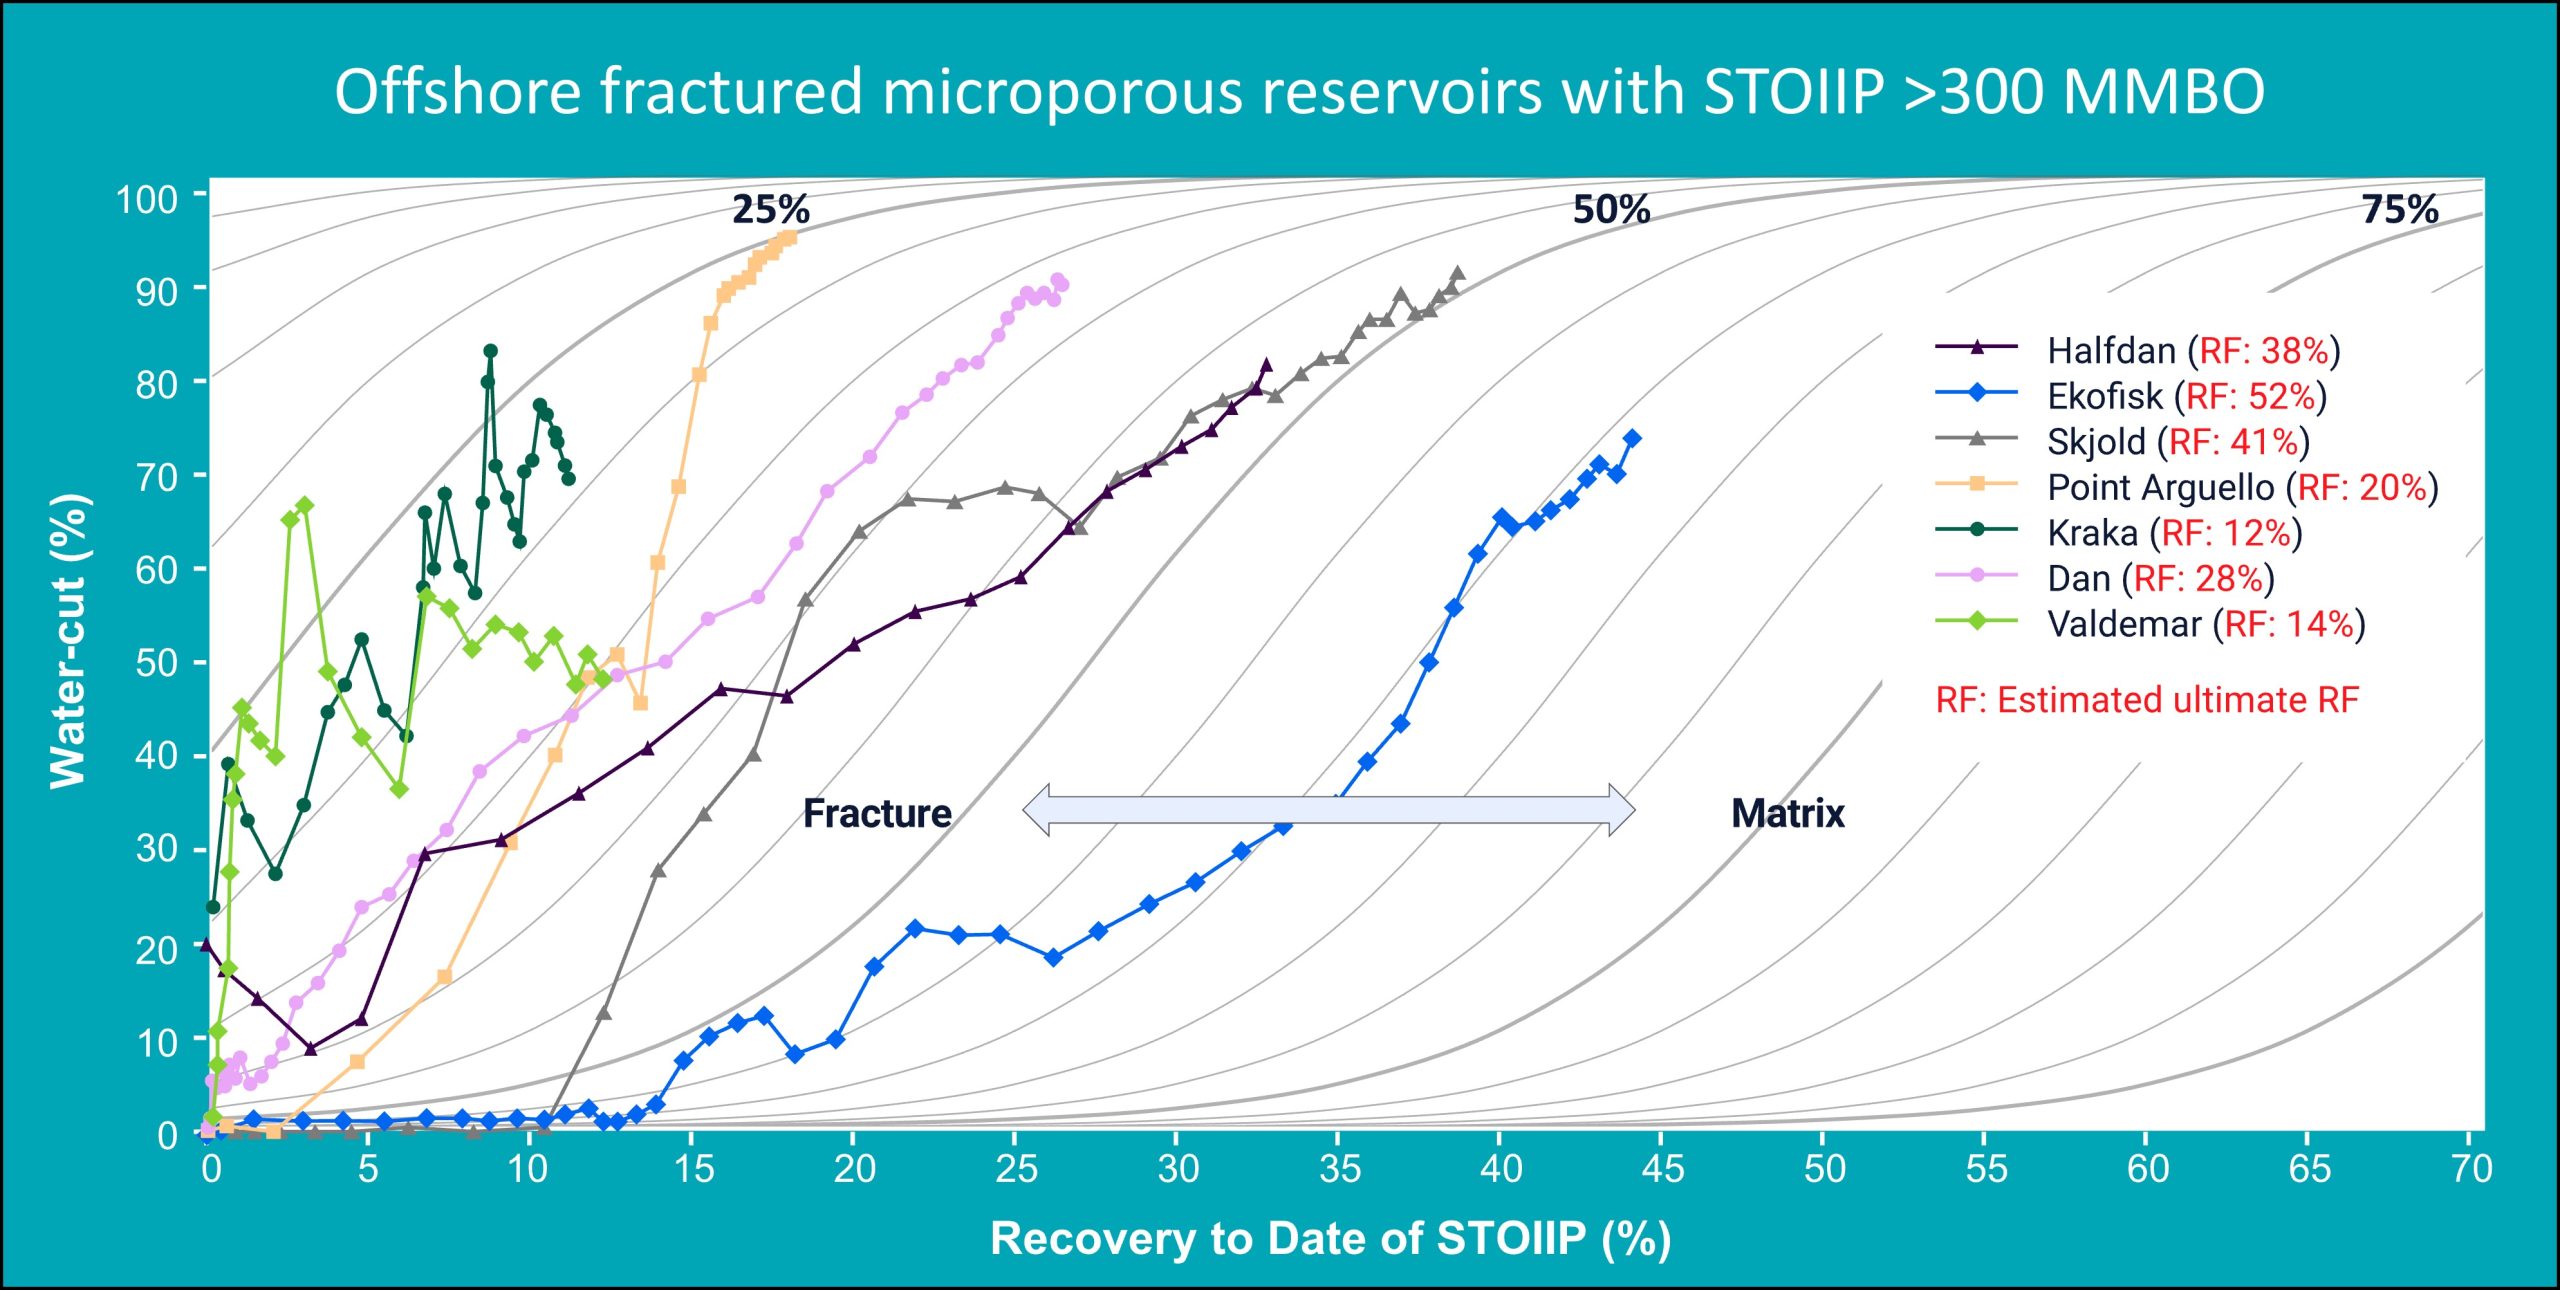 Fig. 3 - Normalized production performance chart for seven offshore fractured microporous oil reservoirs for which reliable production data are available: water-cut versus recovery-to-date (% of in-place oil).